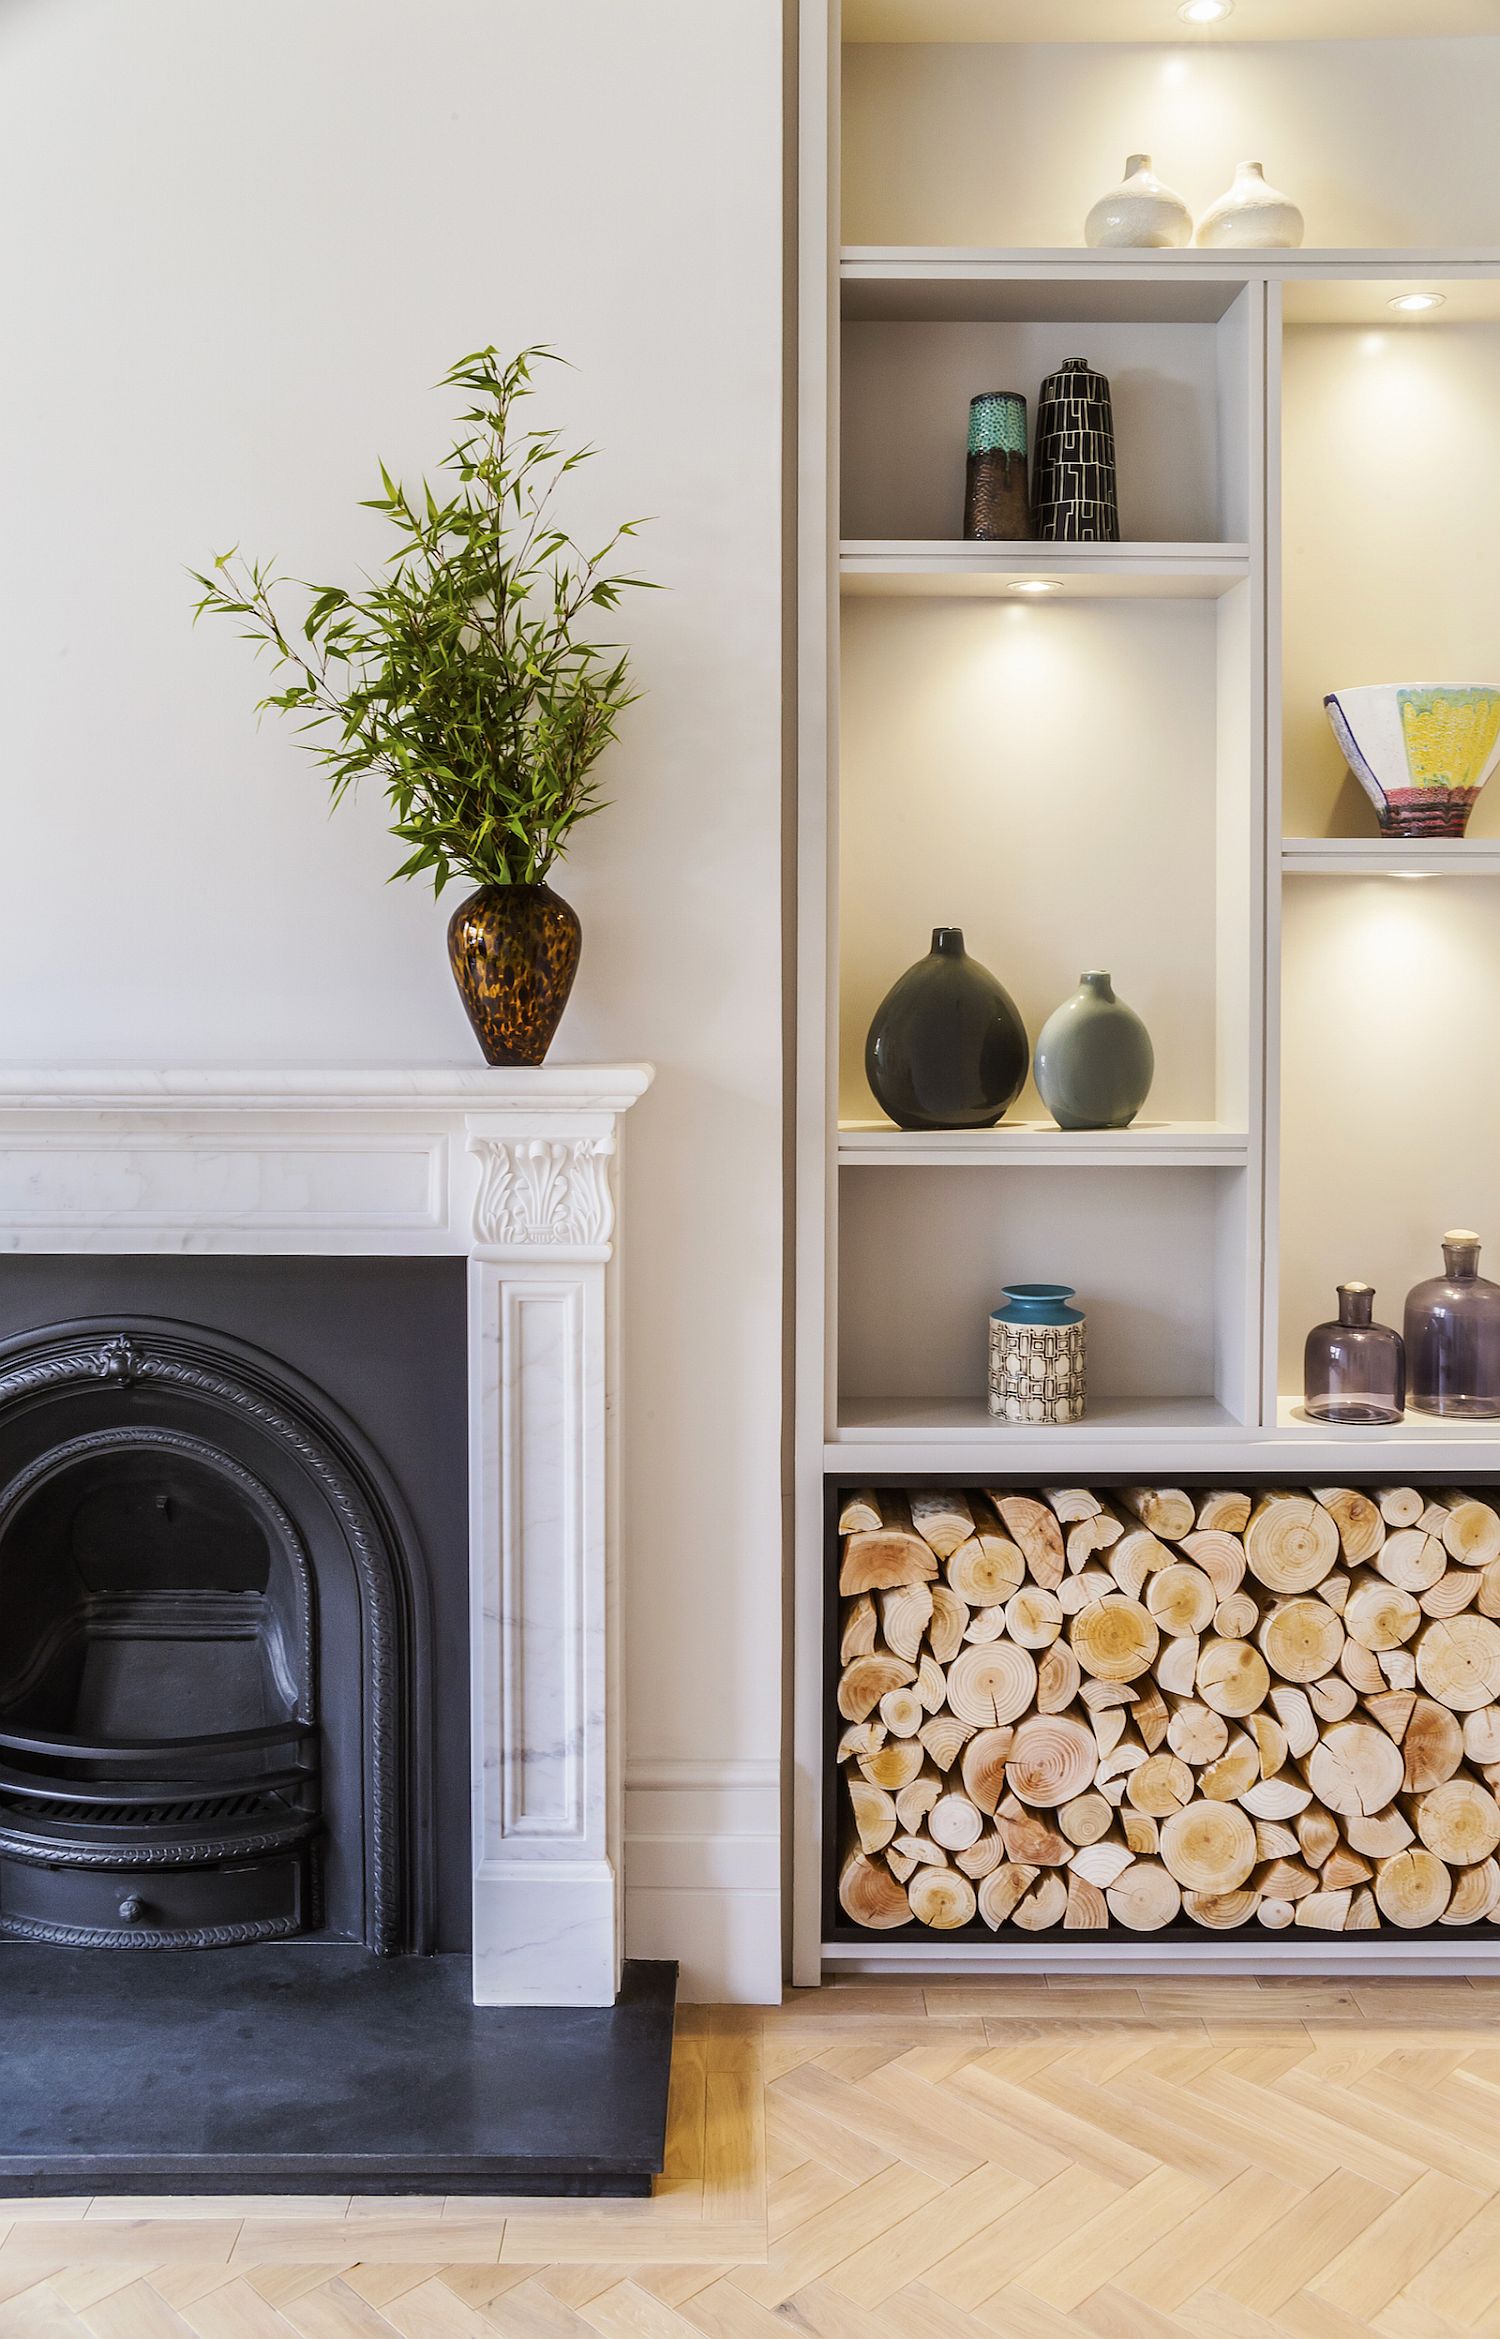 Enhanced-Victorian-features-of-the-revamped-London-townhouse